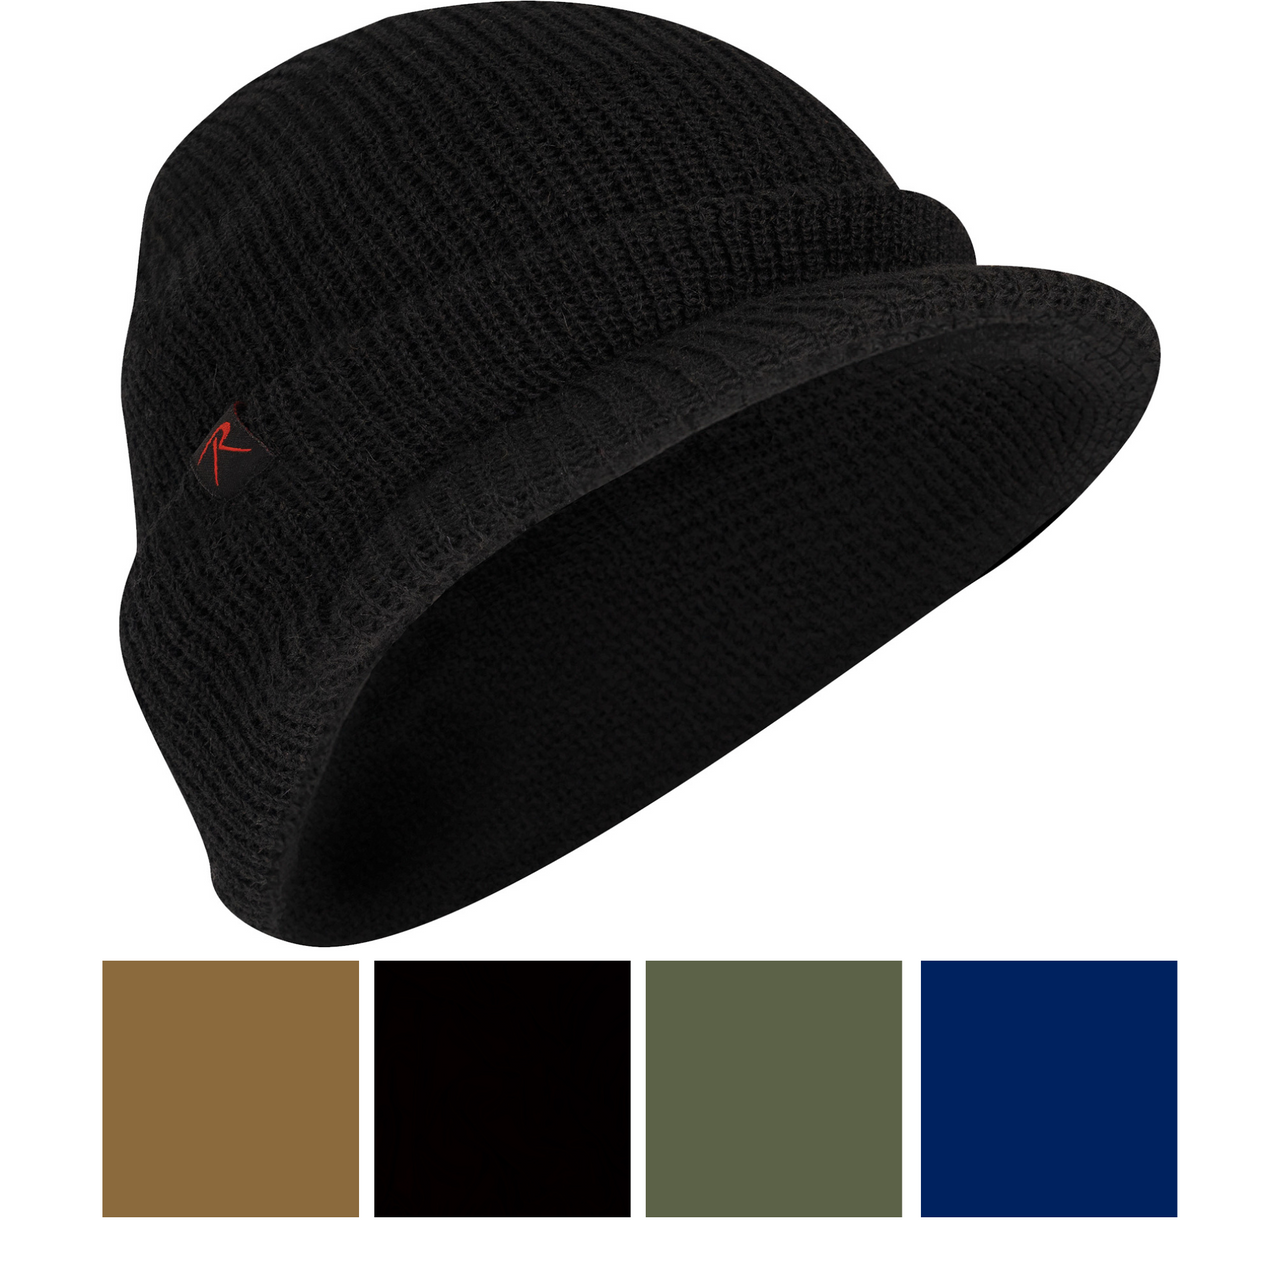 Wool Watch Visor Army Hat with with Beanie - Brim Universe Cap